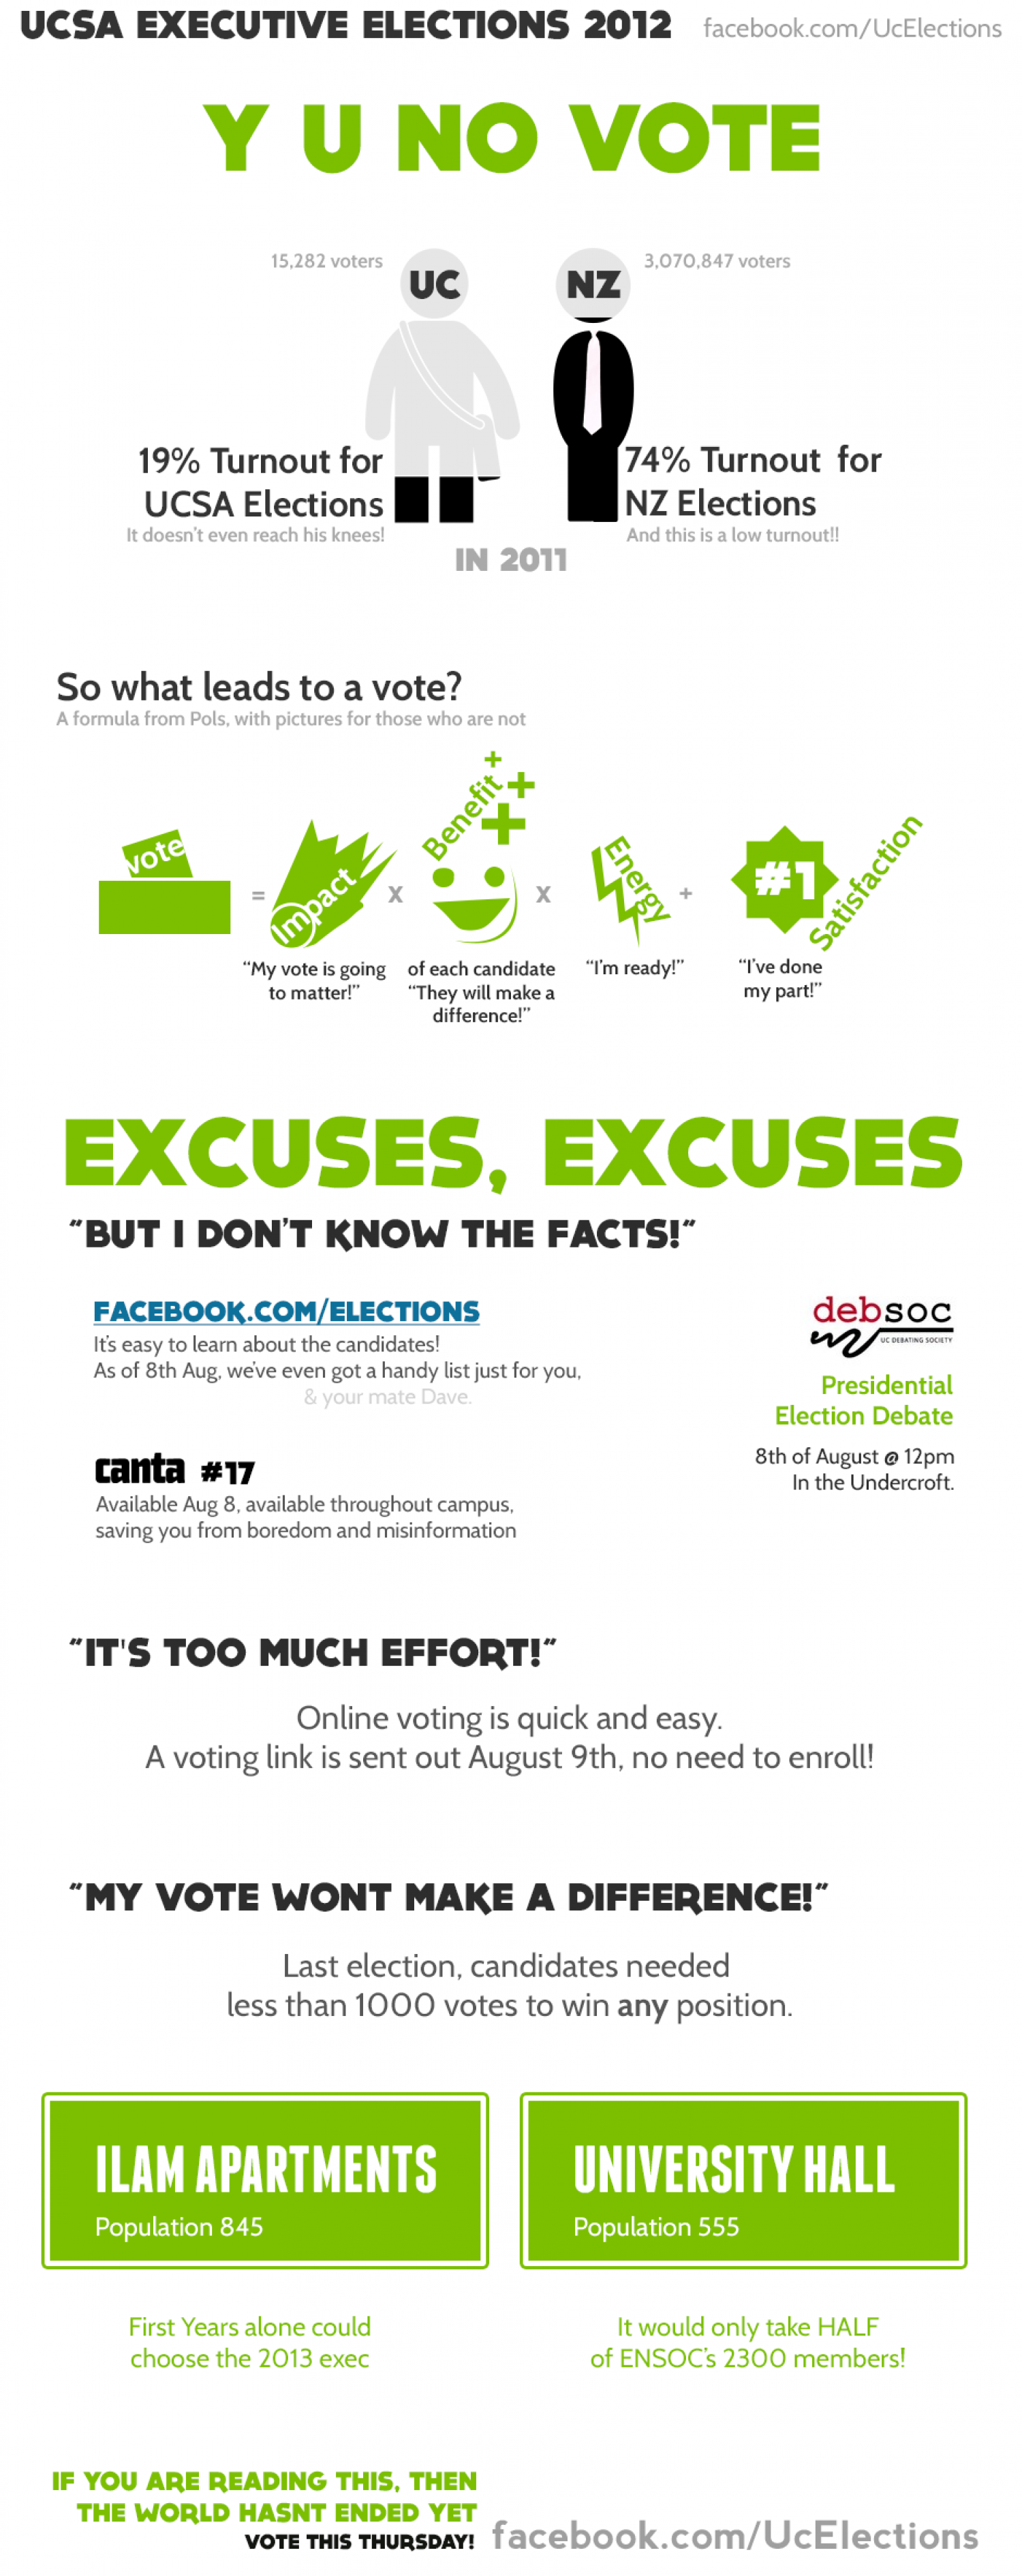 Why are you choosing not to vote? Infographic